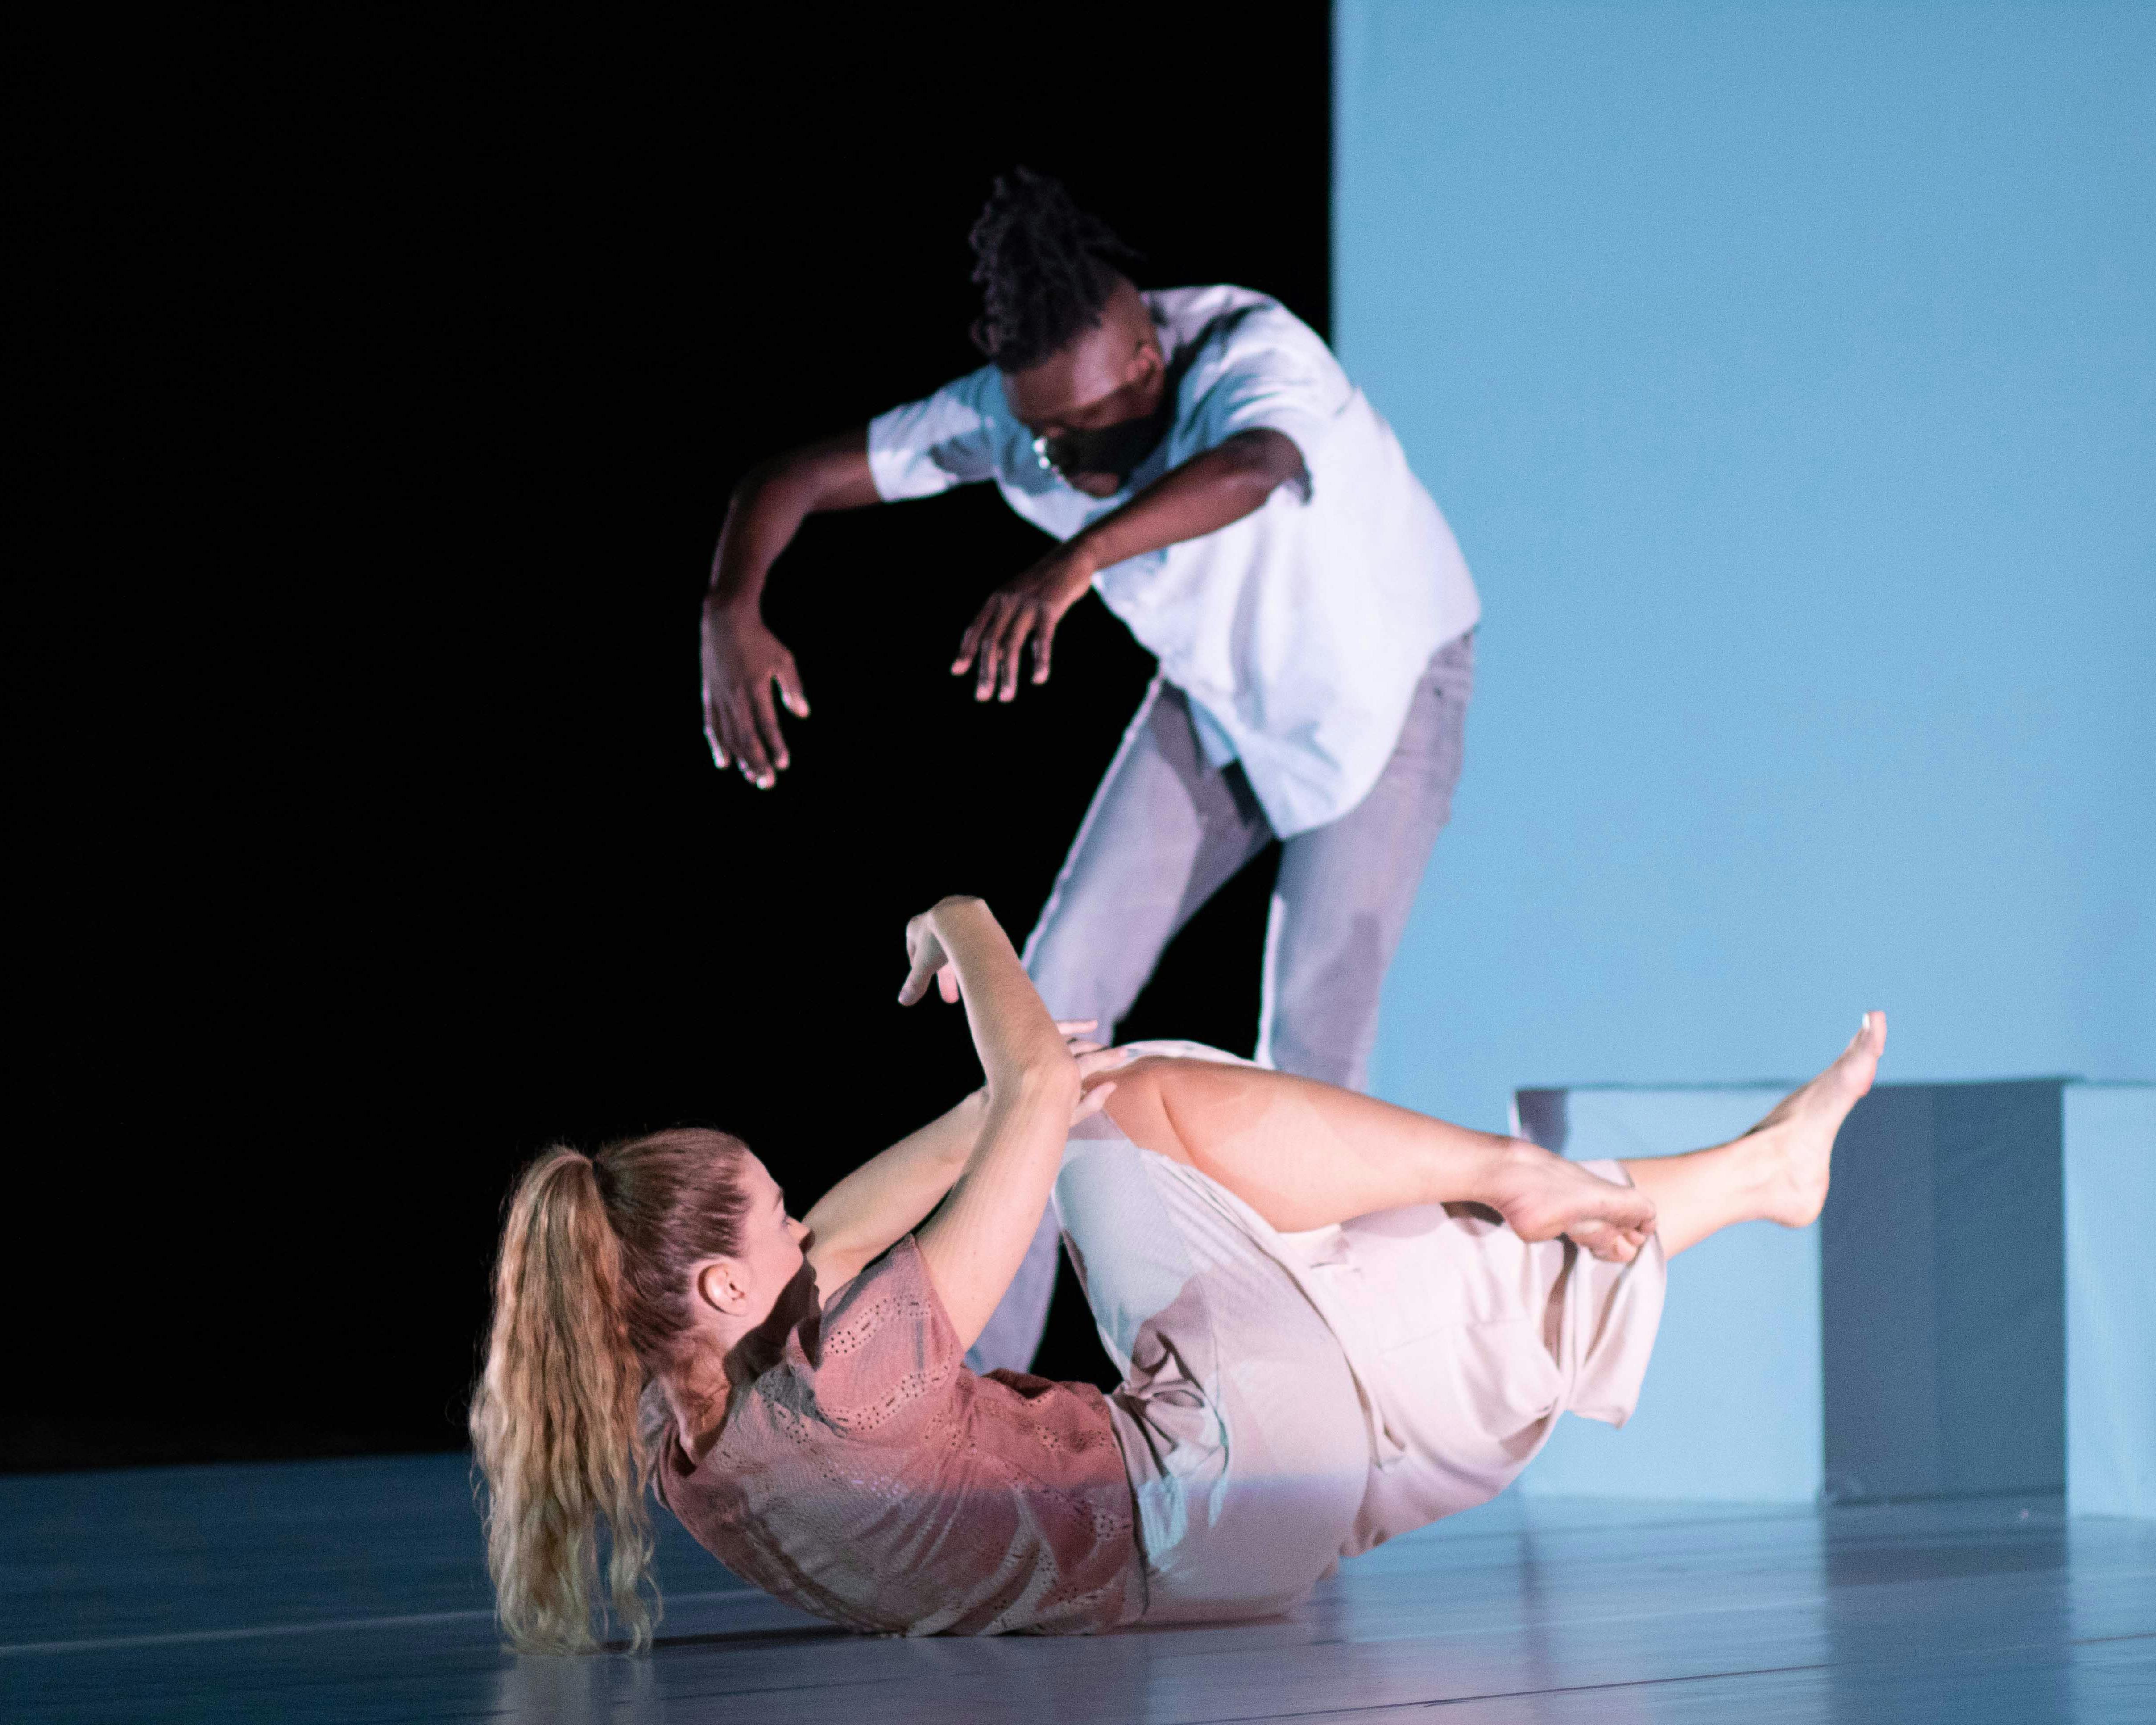 Sarah Bockers and Dodzi Dougban on stage during the preformance Gravity.  She is with her back to the floor, arms and legs raised off the stage; he is standing, with his back in contraction and his arms extended forward.